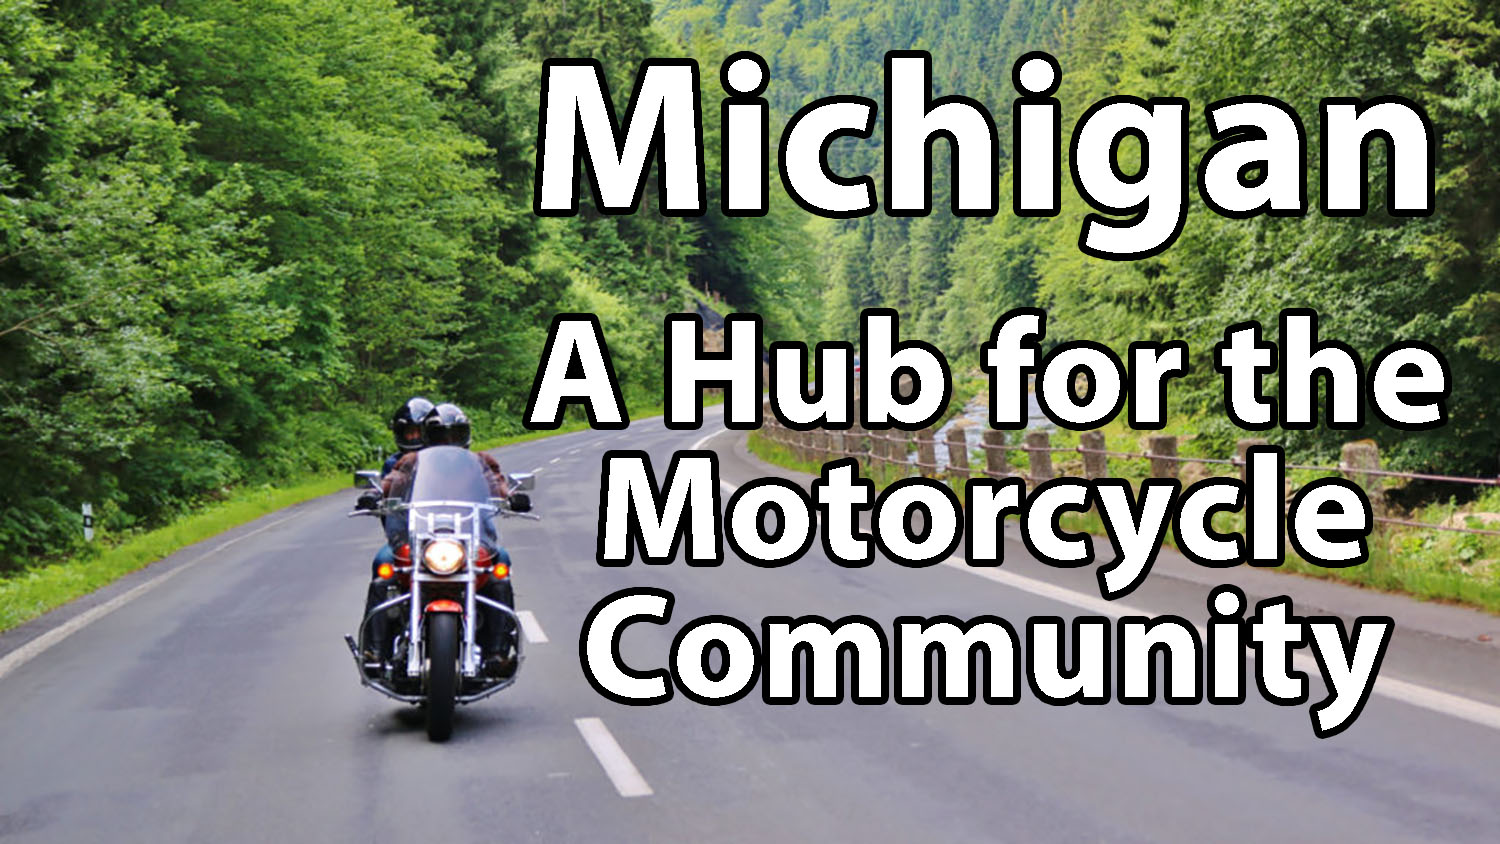 Michigan - A Hub for the Motorcycle Community